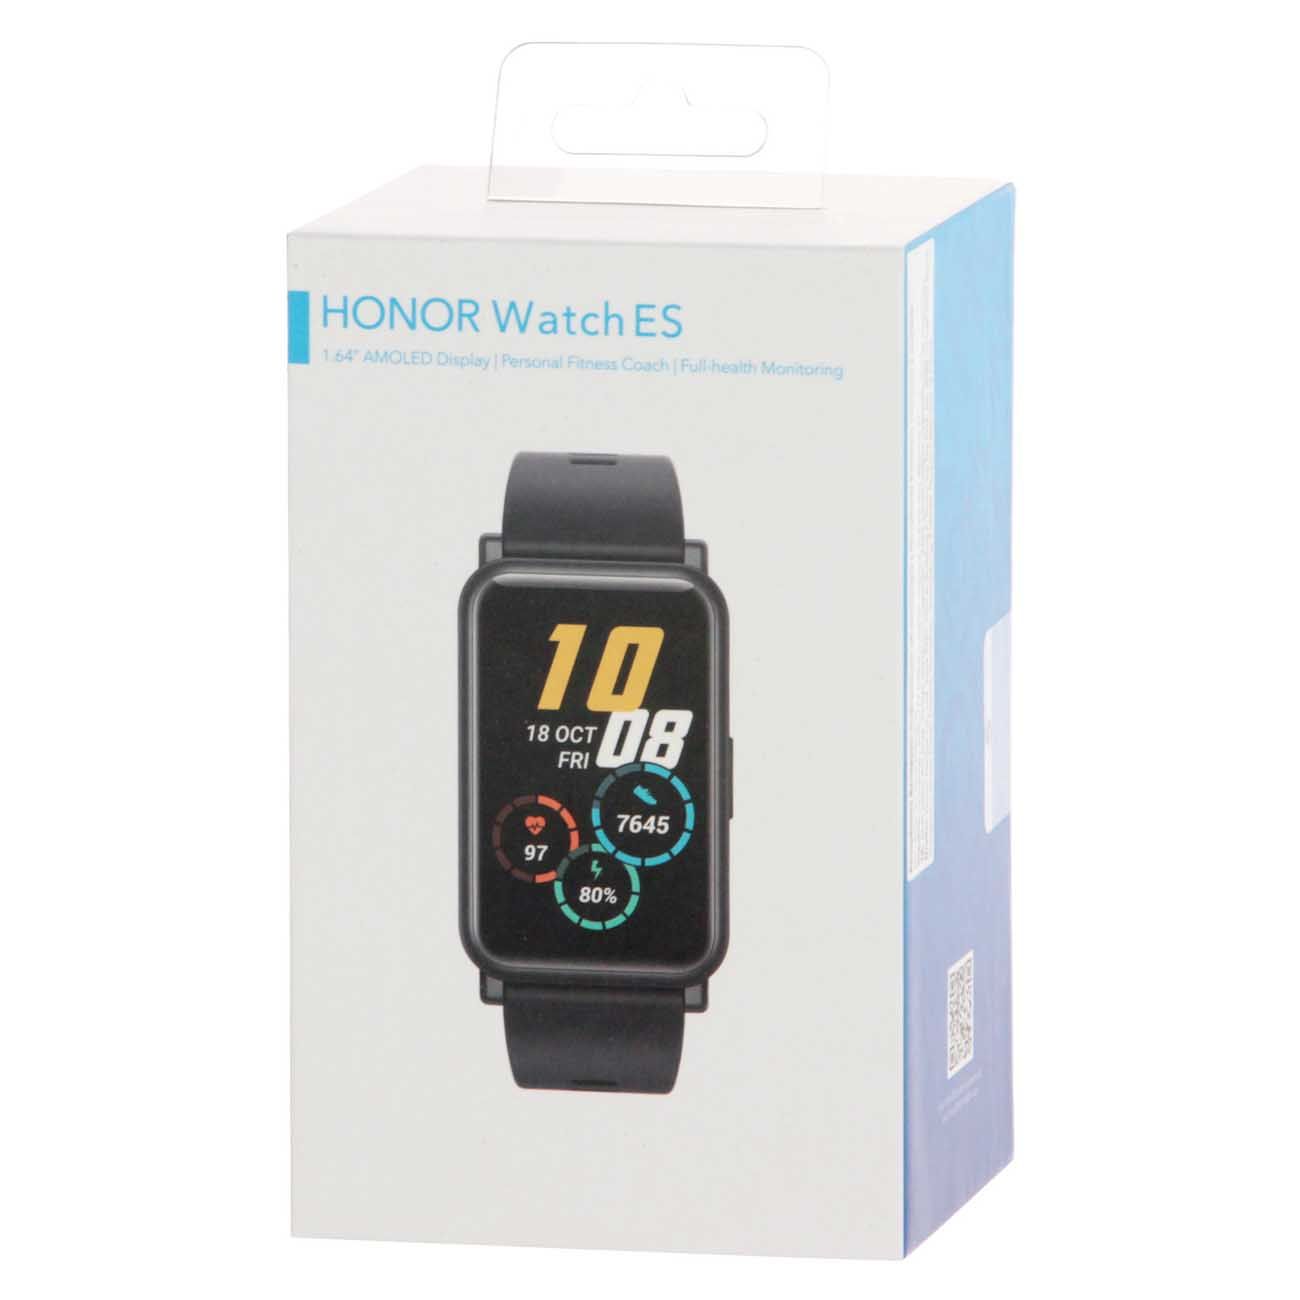 Honor watch es hes. Смарт-часы Honor watch es (hes-b39).